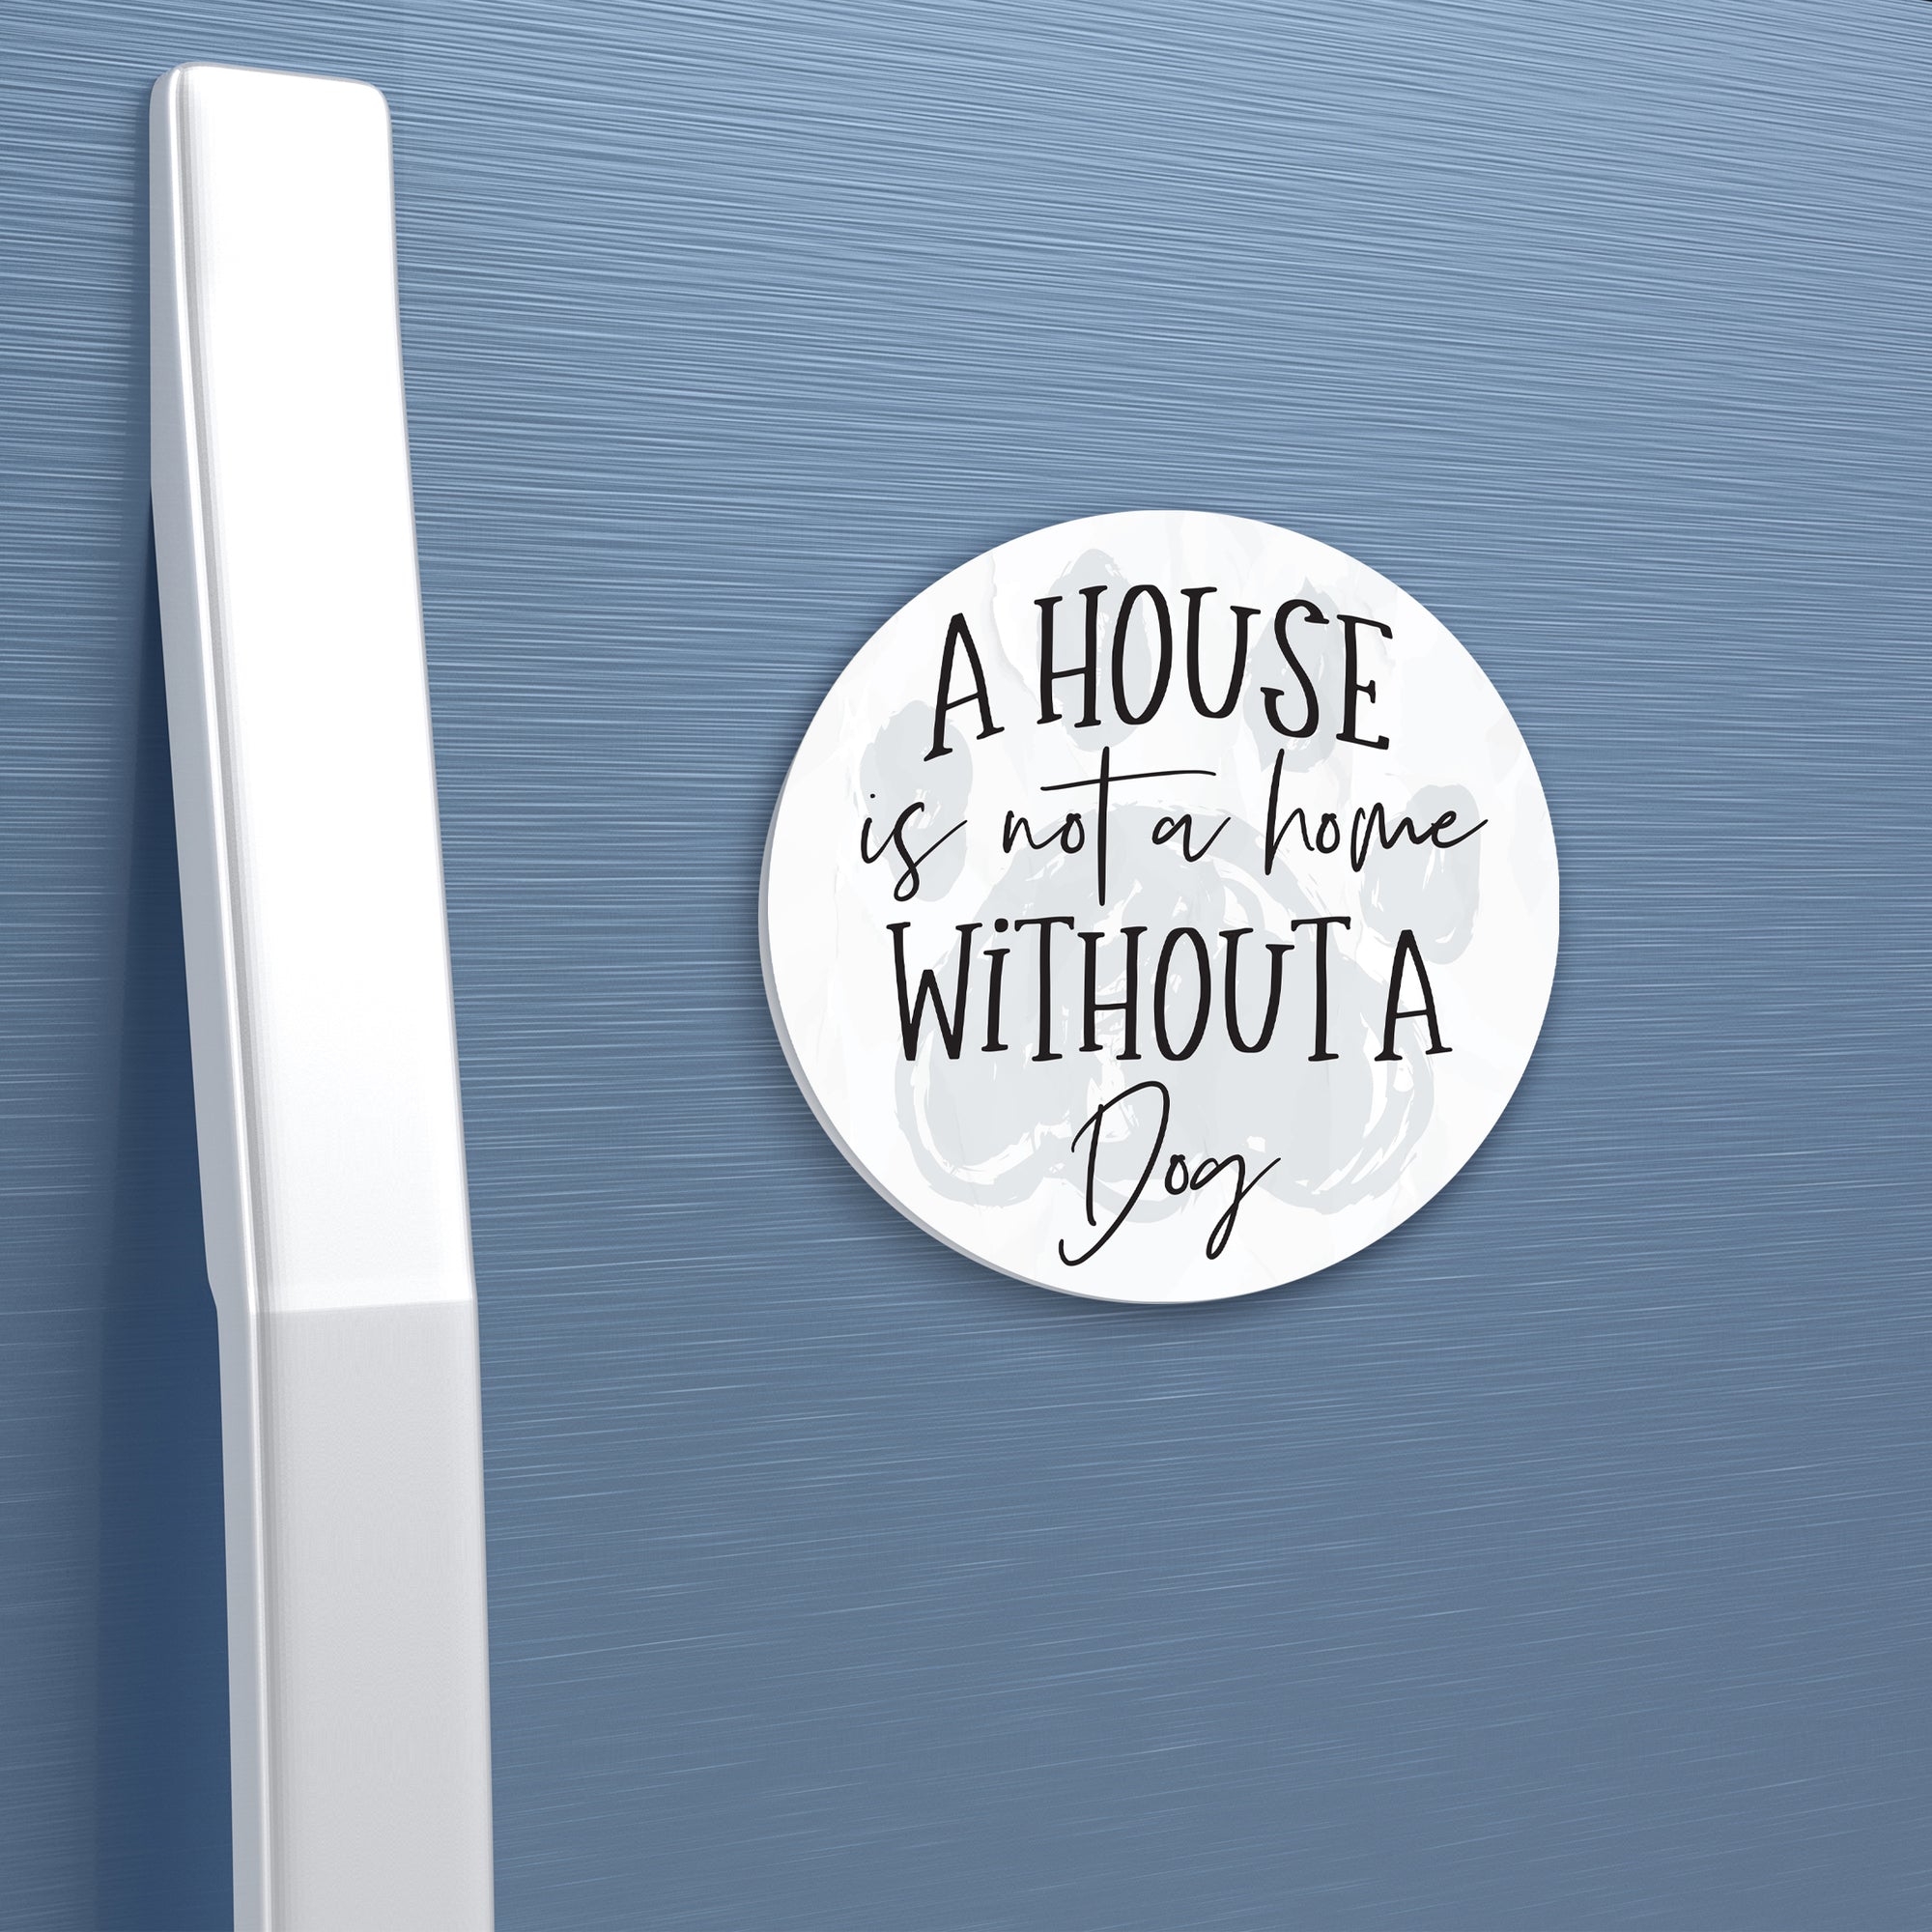 Refrigerator Magnet Perfect Gift Idea For Pet Owners - A House Is Not A Home